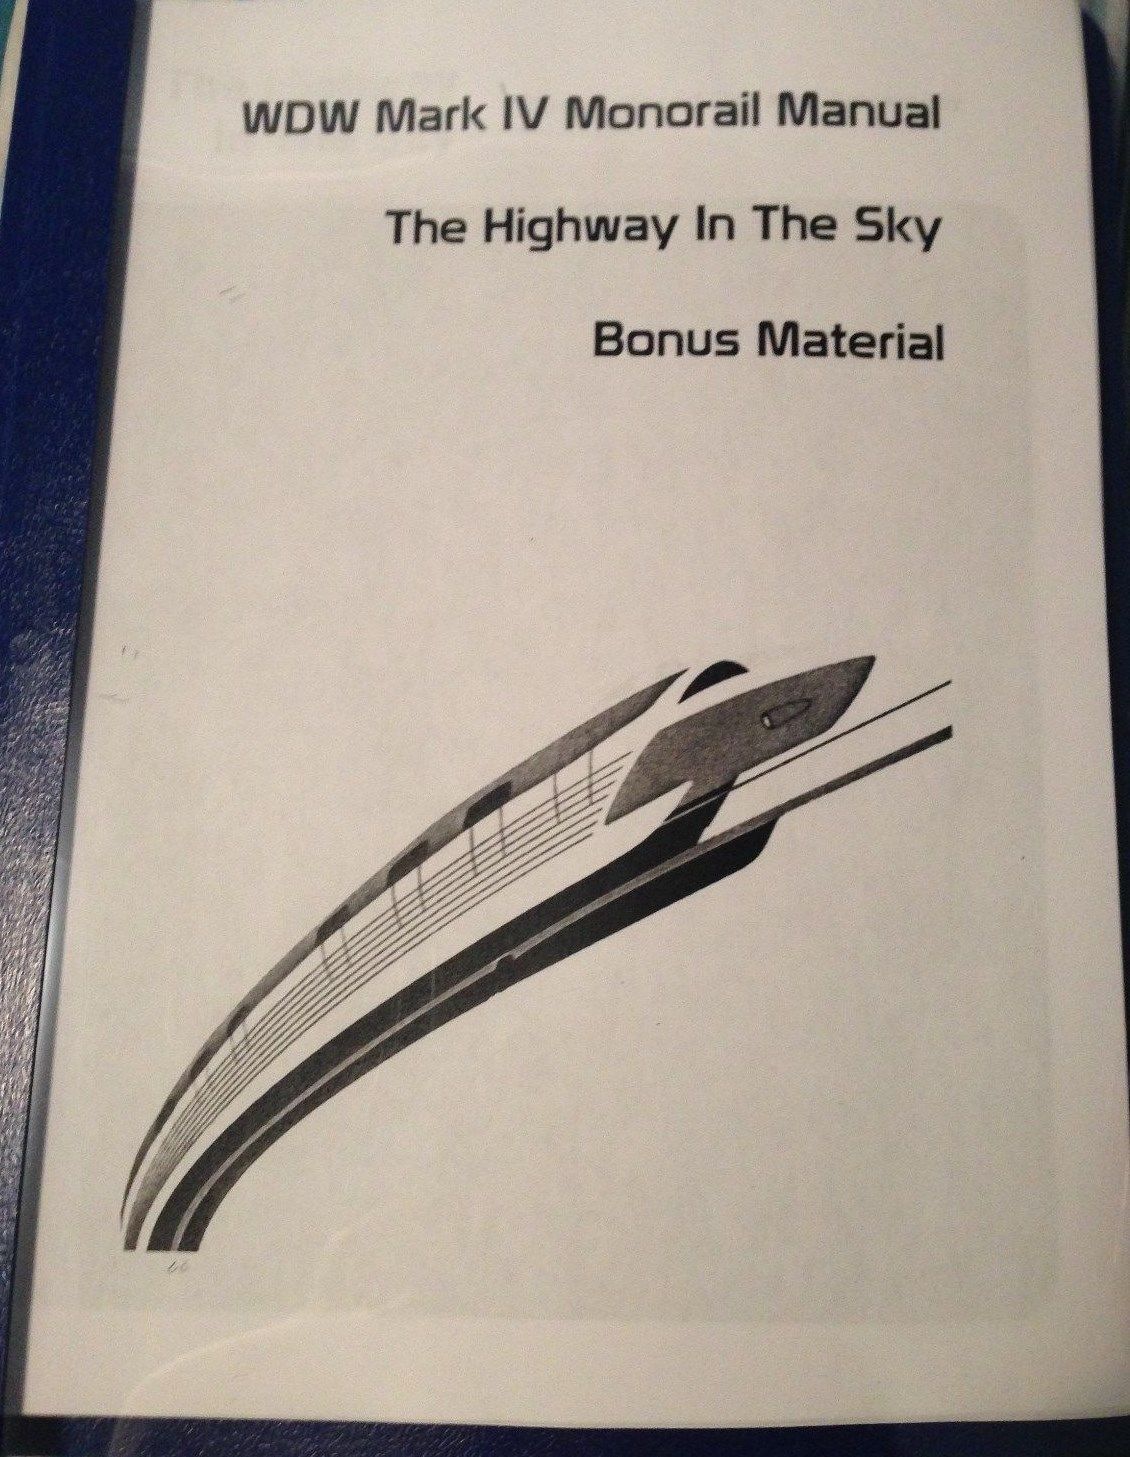 Disney\'s Monorail Fact and Training guide. Standard operating procedure.